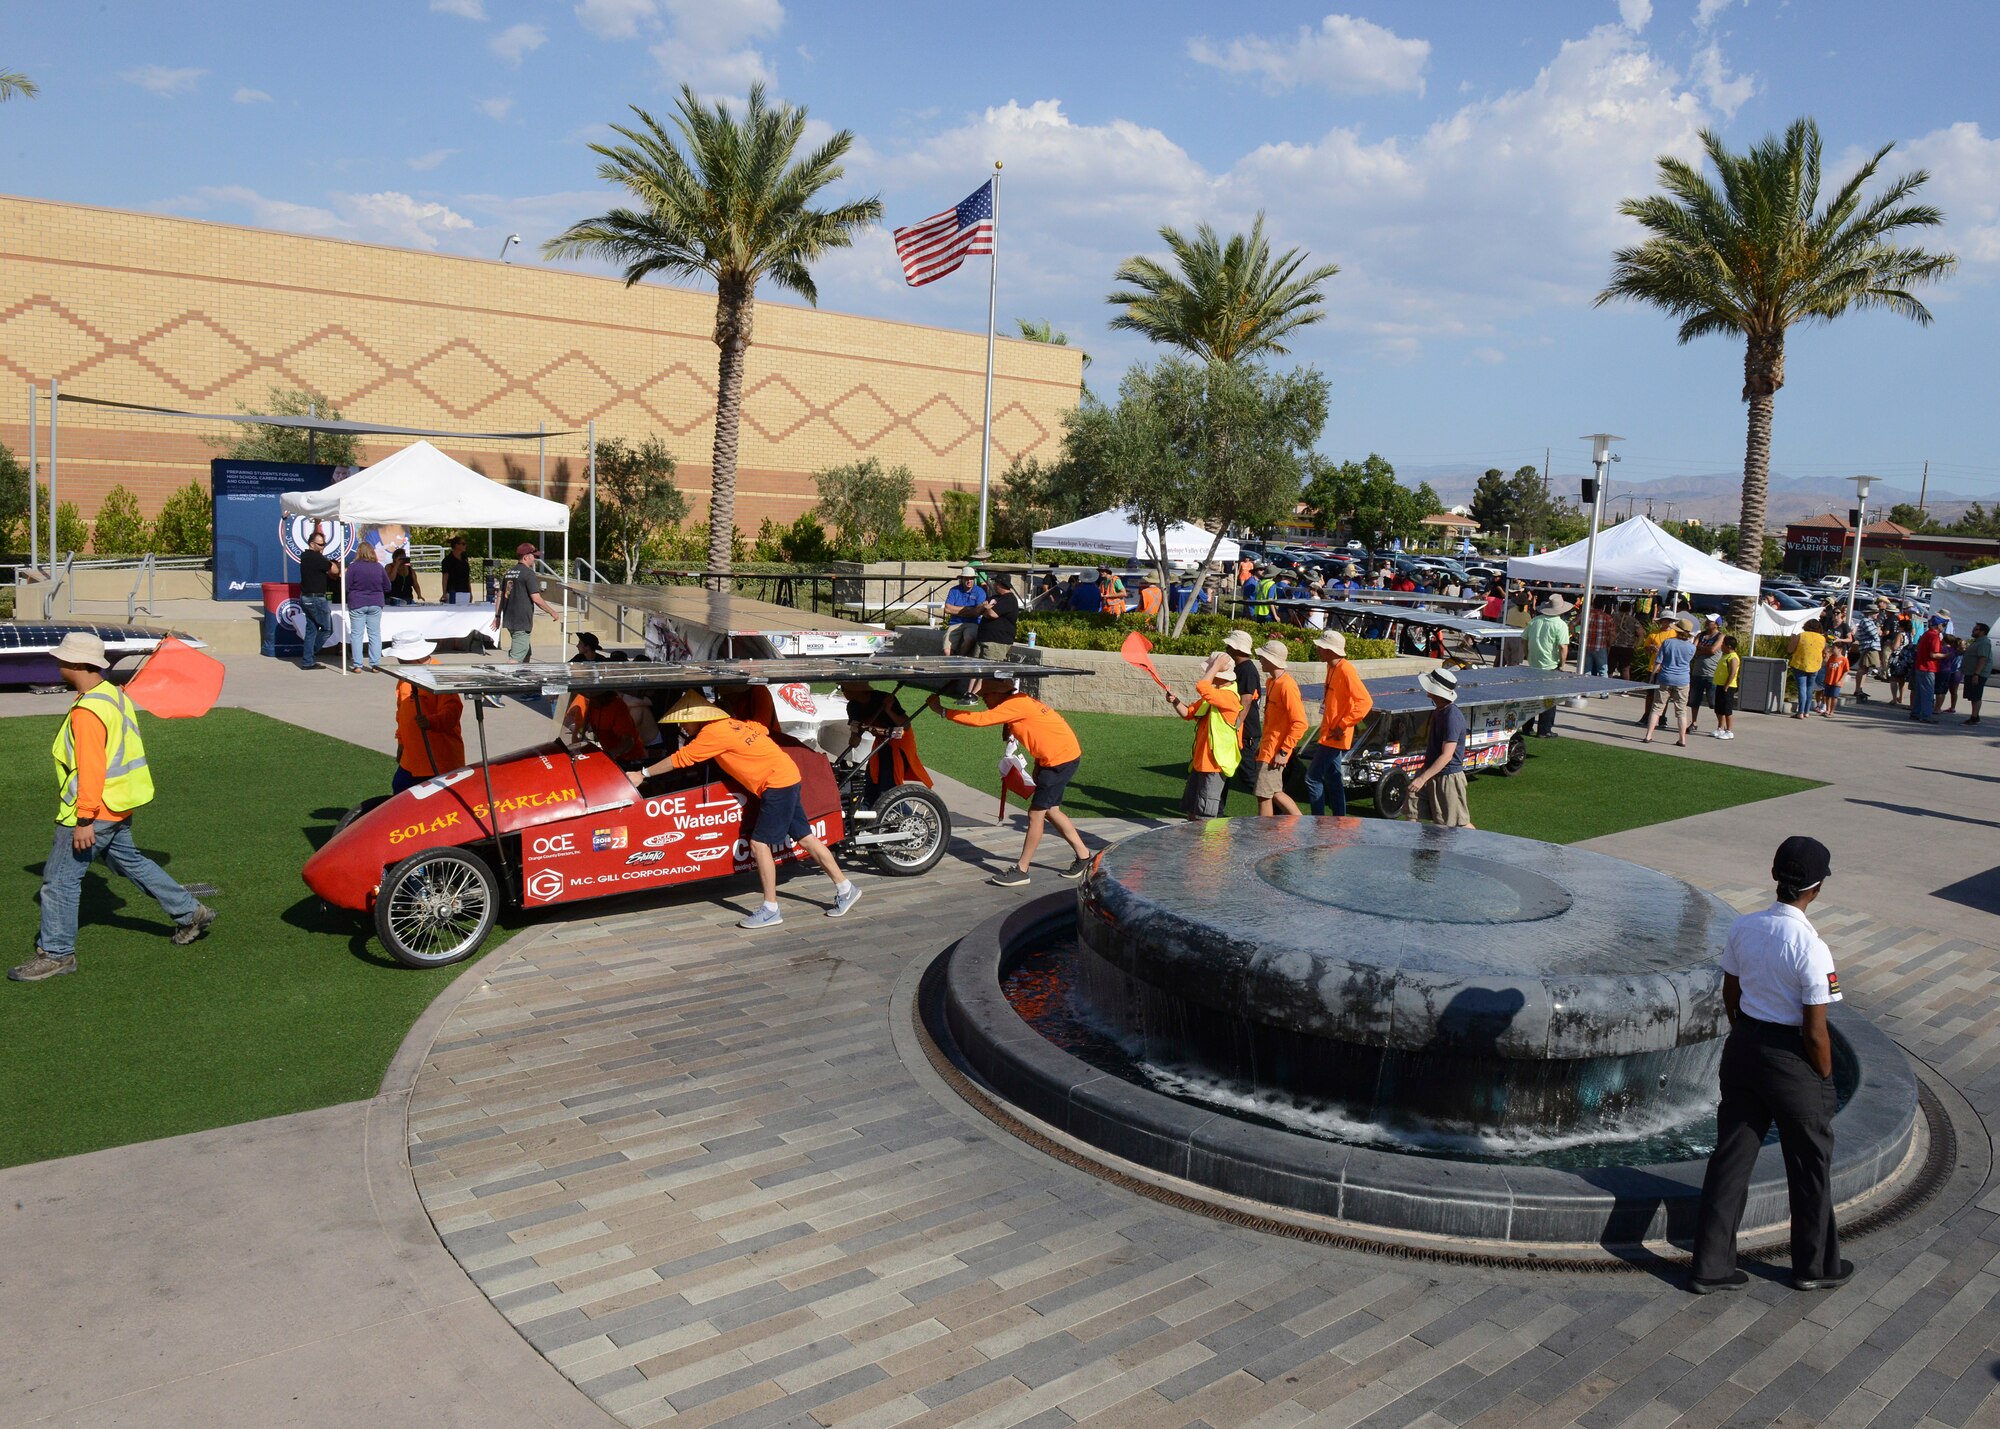 Fueled only by the sun’s rays, 26 custom-built cars made their way across the United States on a trek that ended at the Antelope Valley Mall in Palmdale, California, July 23 for the finale of this year’s Solar Car Challenge. (U.S. Air Force photo by Kenji Thuloweit)